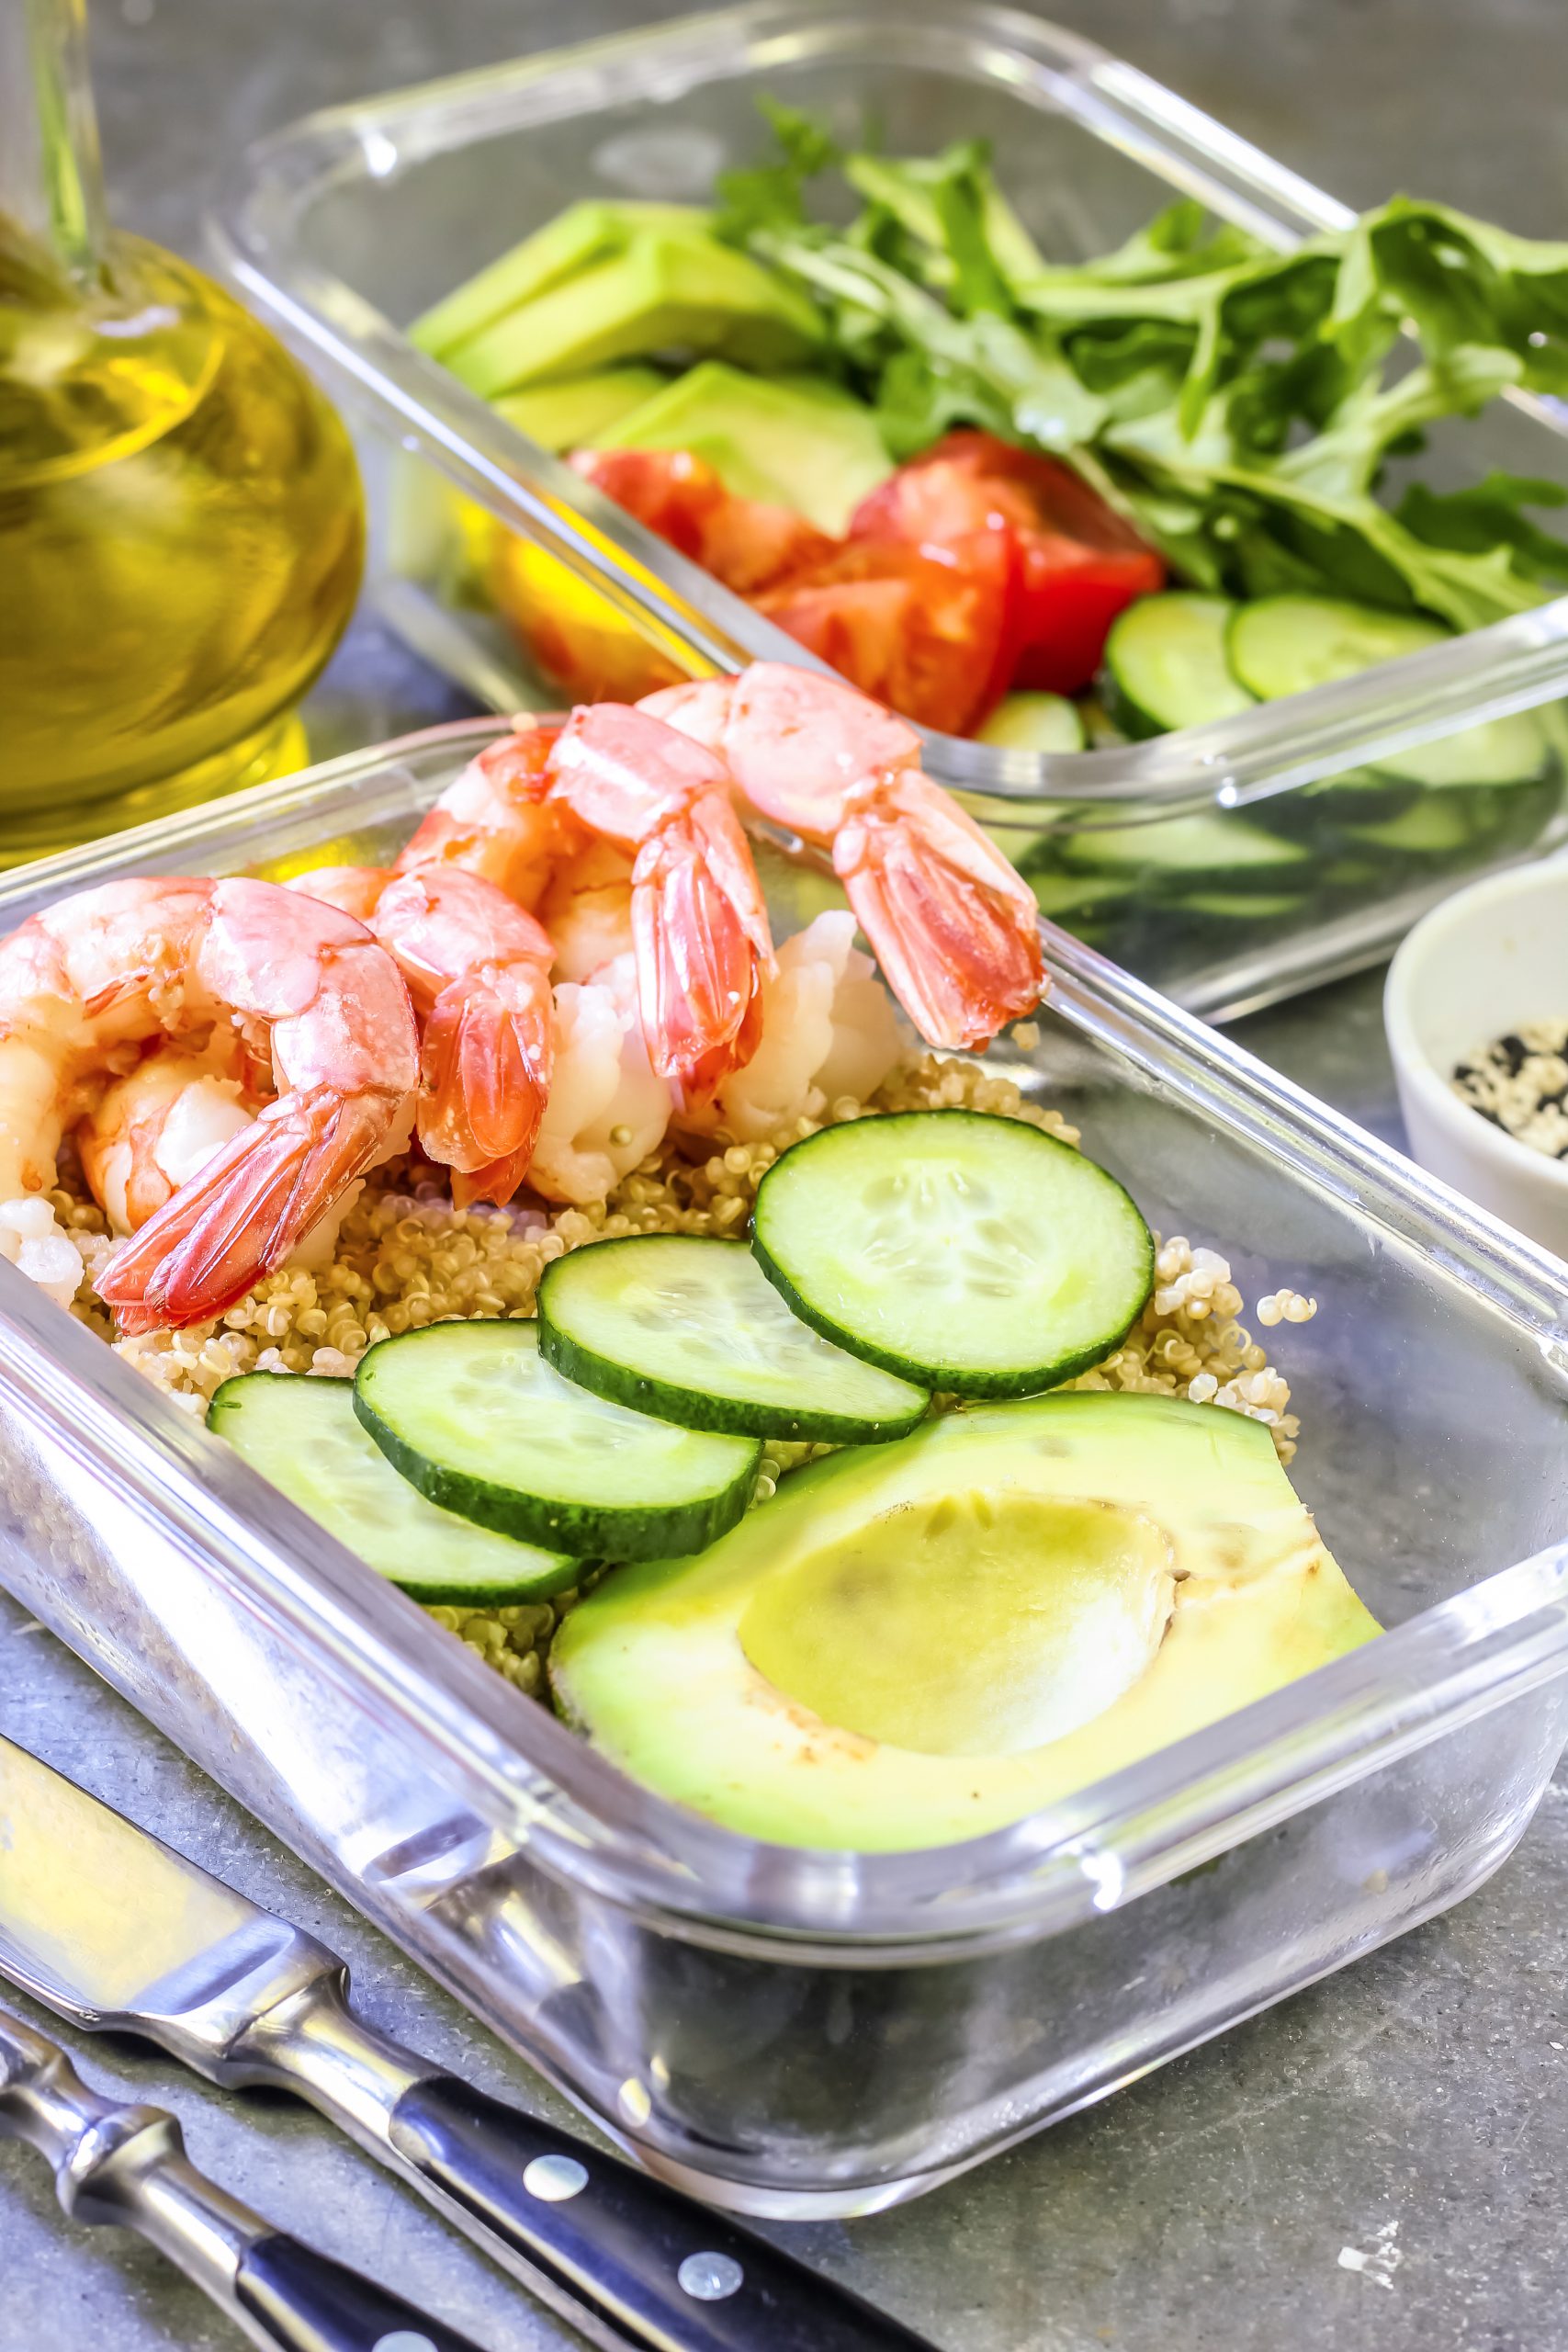 Meal Prep 101: Why Preparing Your Meals in Advance Is the Key to Saving Time and Money